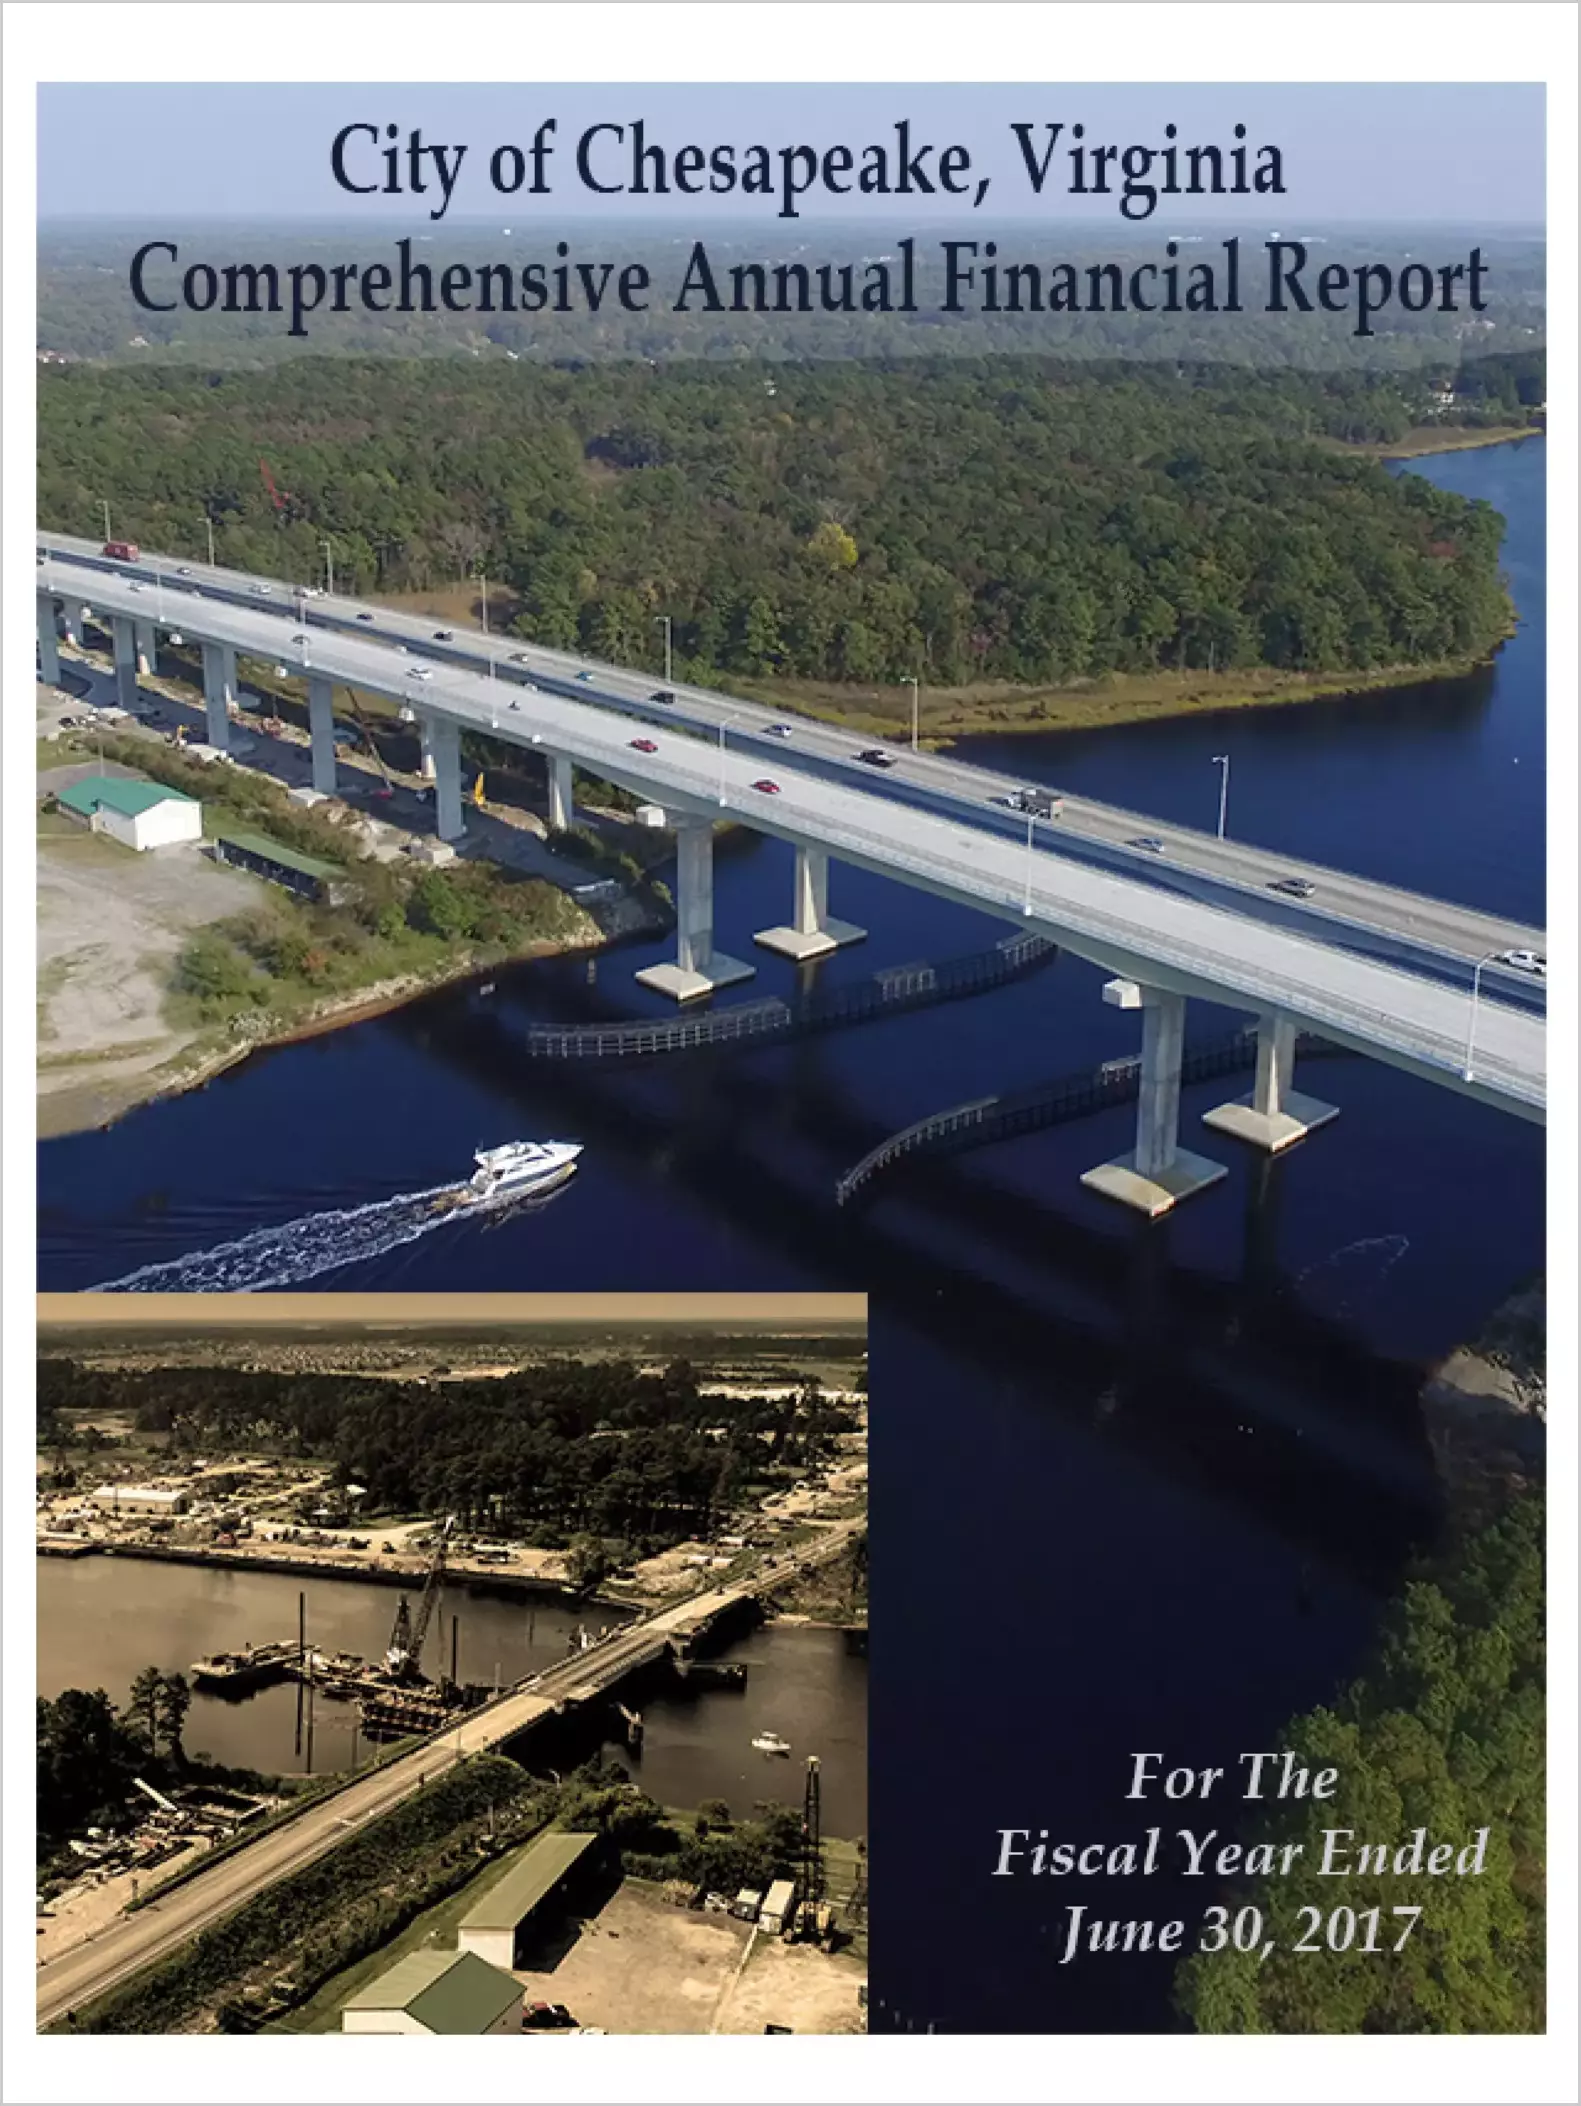 2017 Annual Financial Report for City of Chesapeake